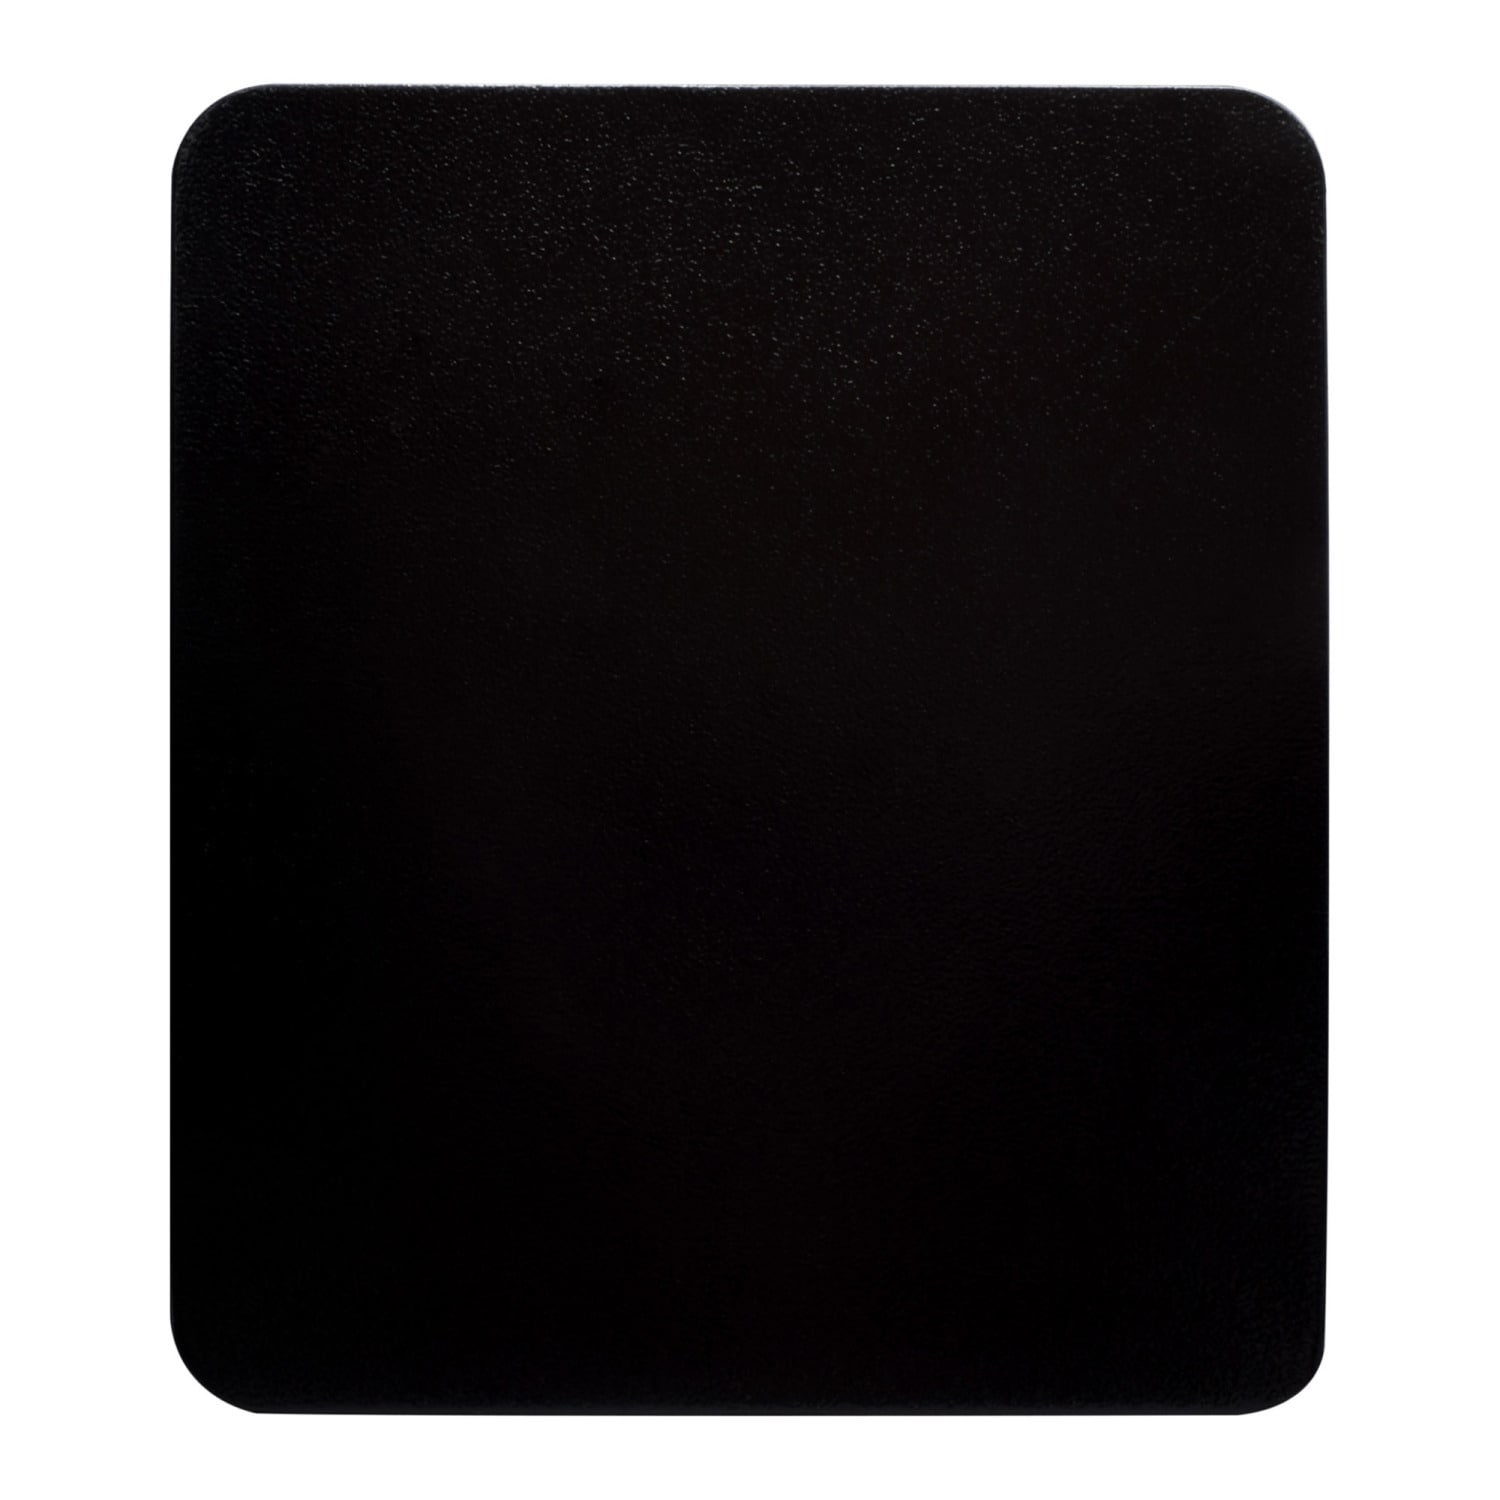 IMPERIAL Black Stove Board in the Wood & Pellet Stove Accessories  department at Lowes.com